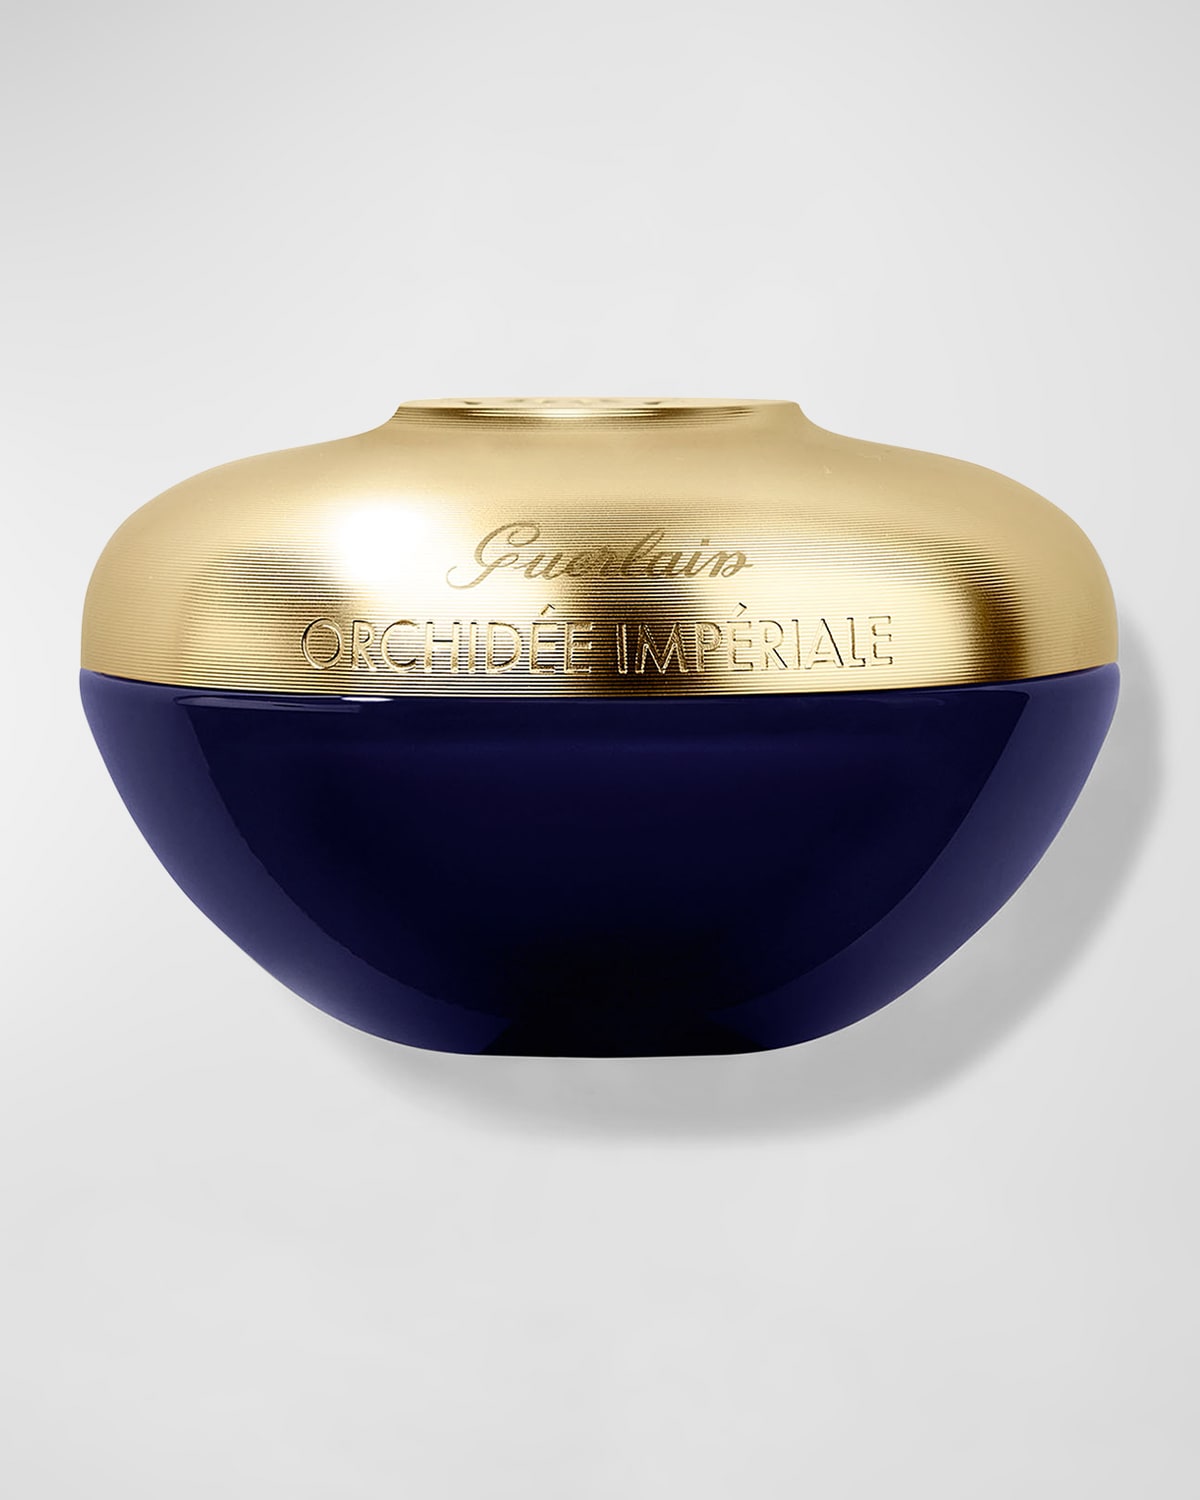 Orchidee Imperiale Anti-Aging Mask, 2.5 oz.